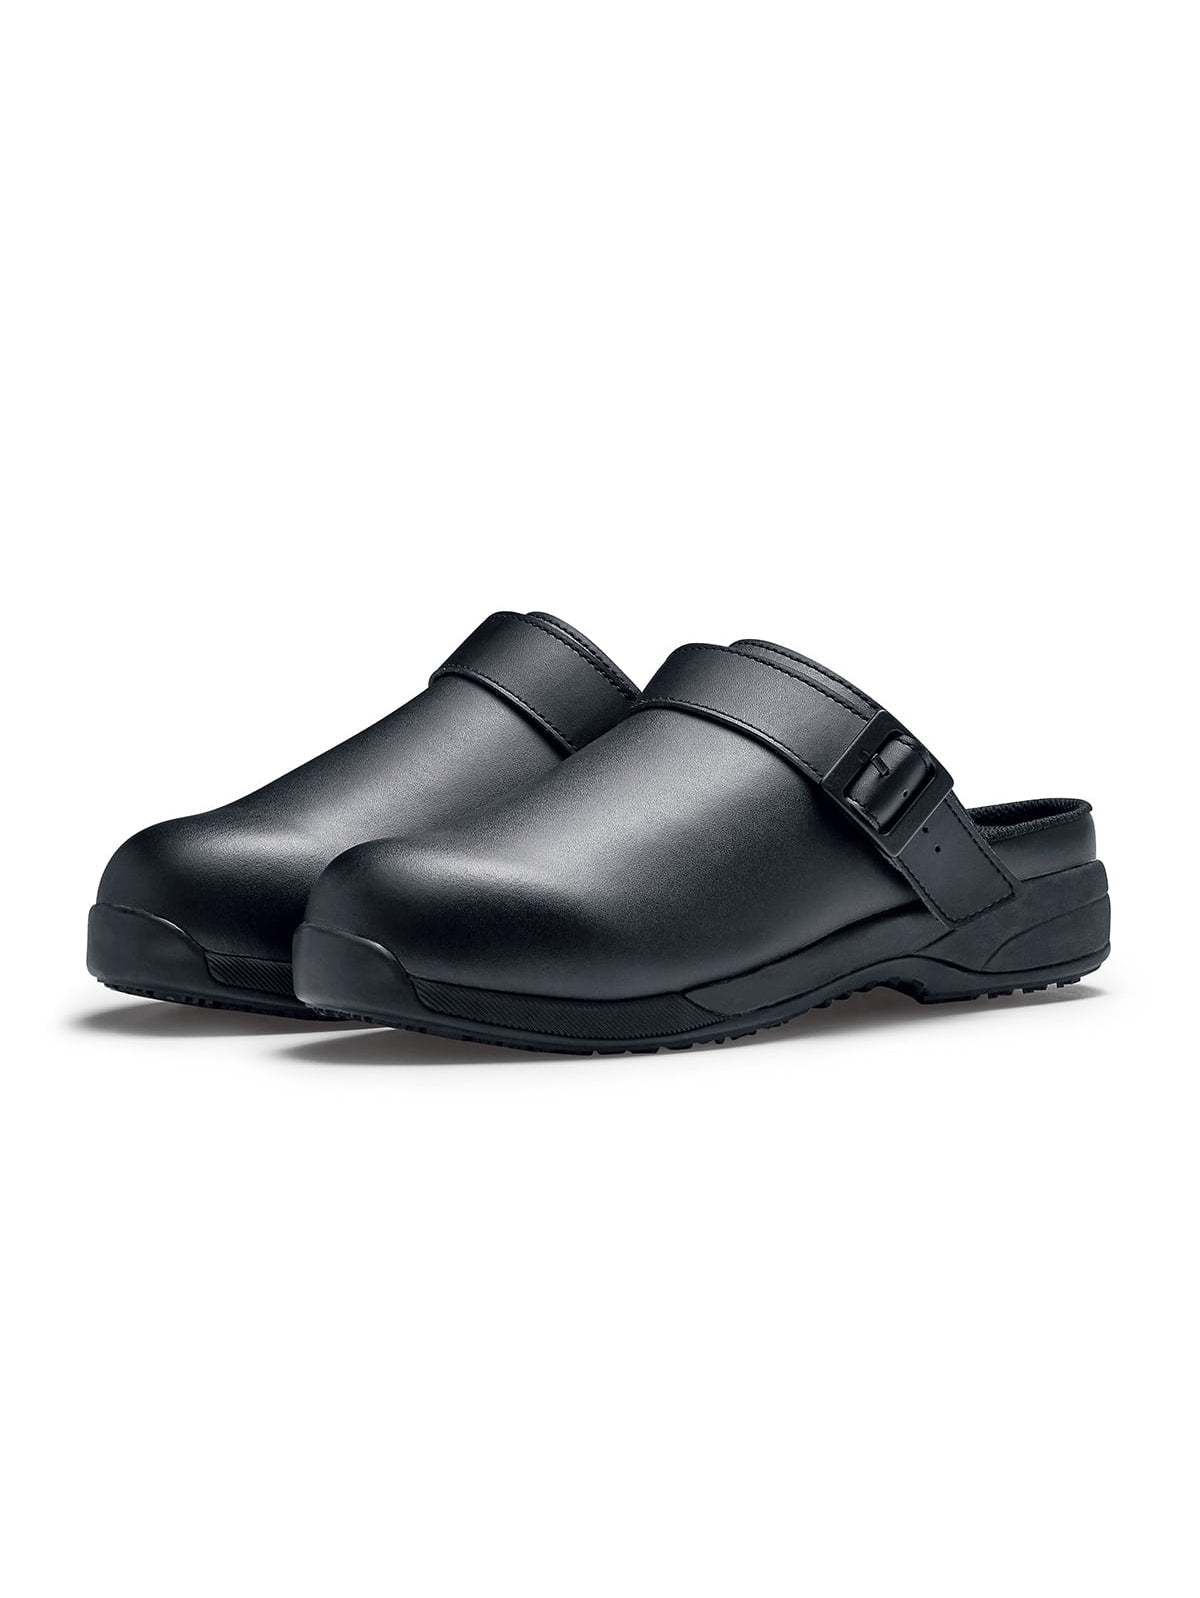 Unisex Work Shoe Triston II Black by Shoes For Crews -  ChefsCotton